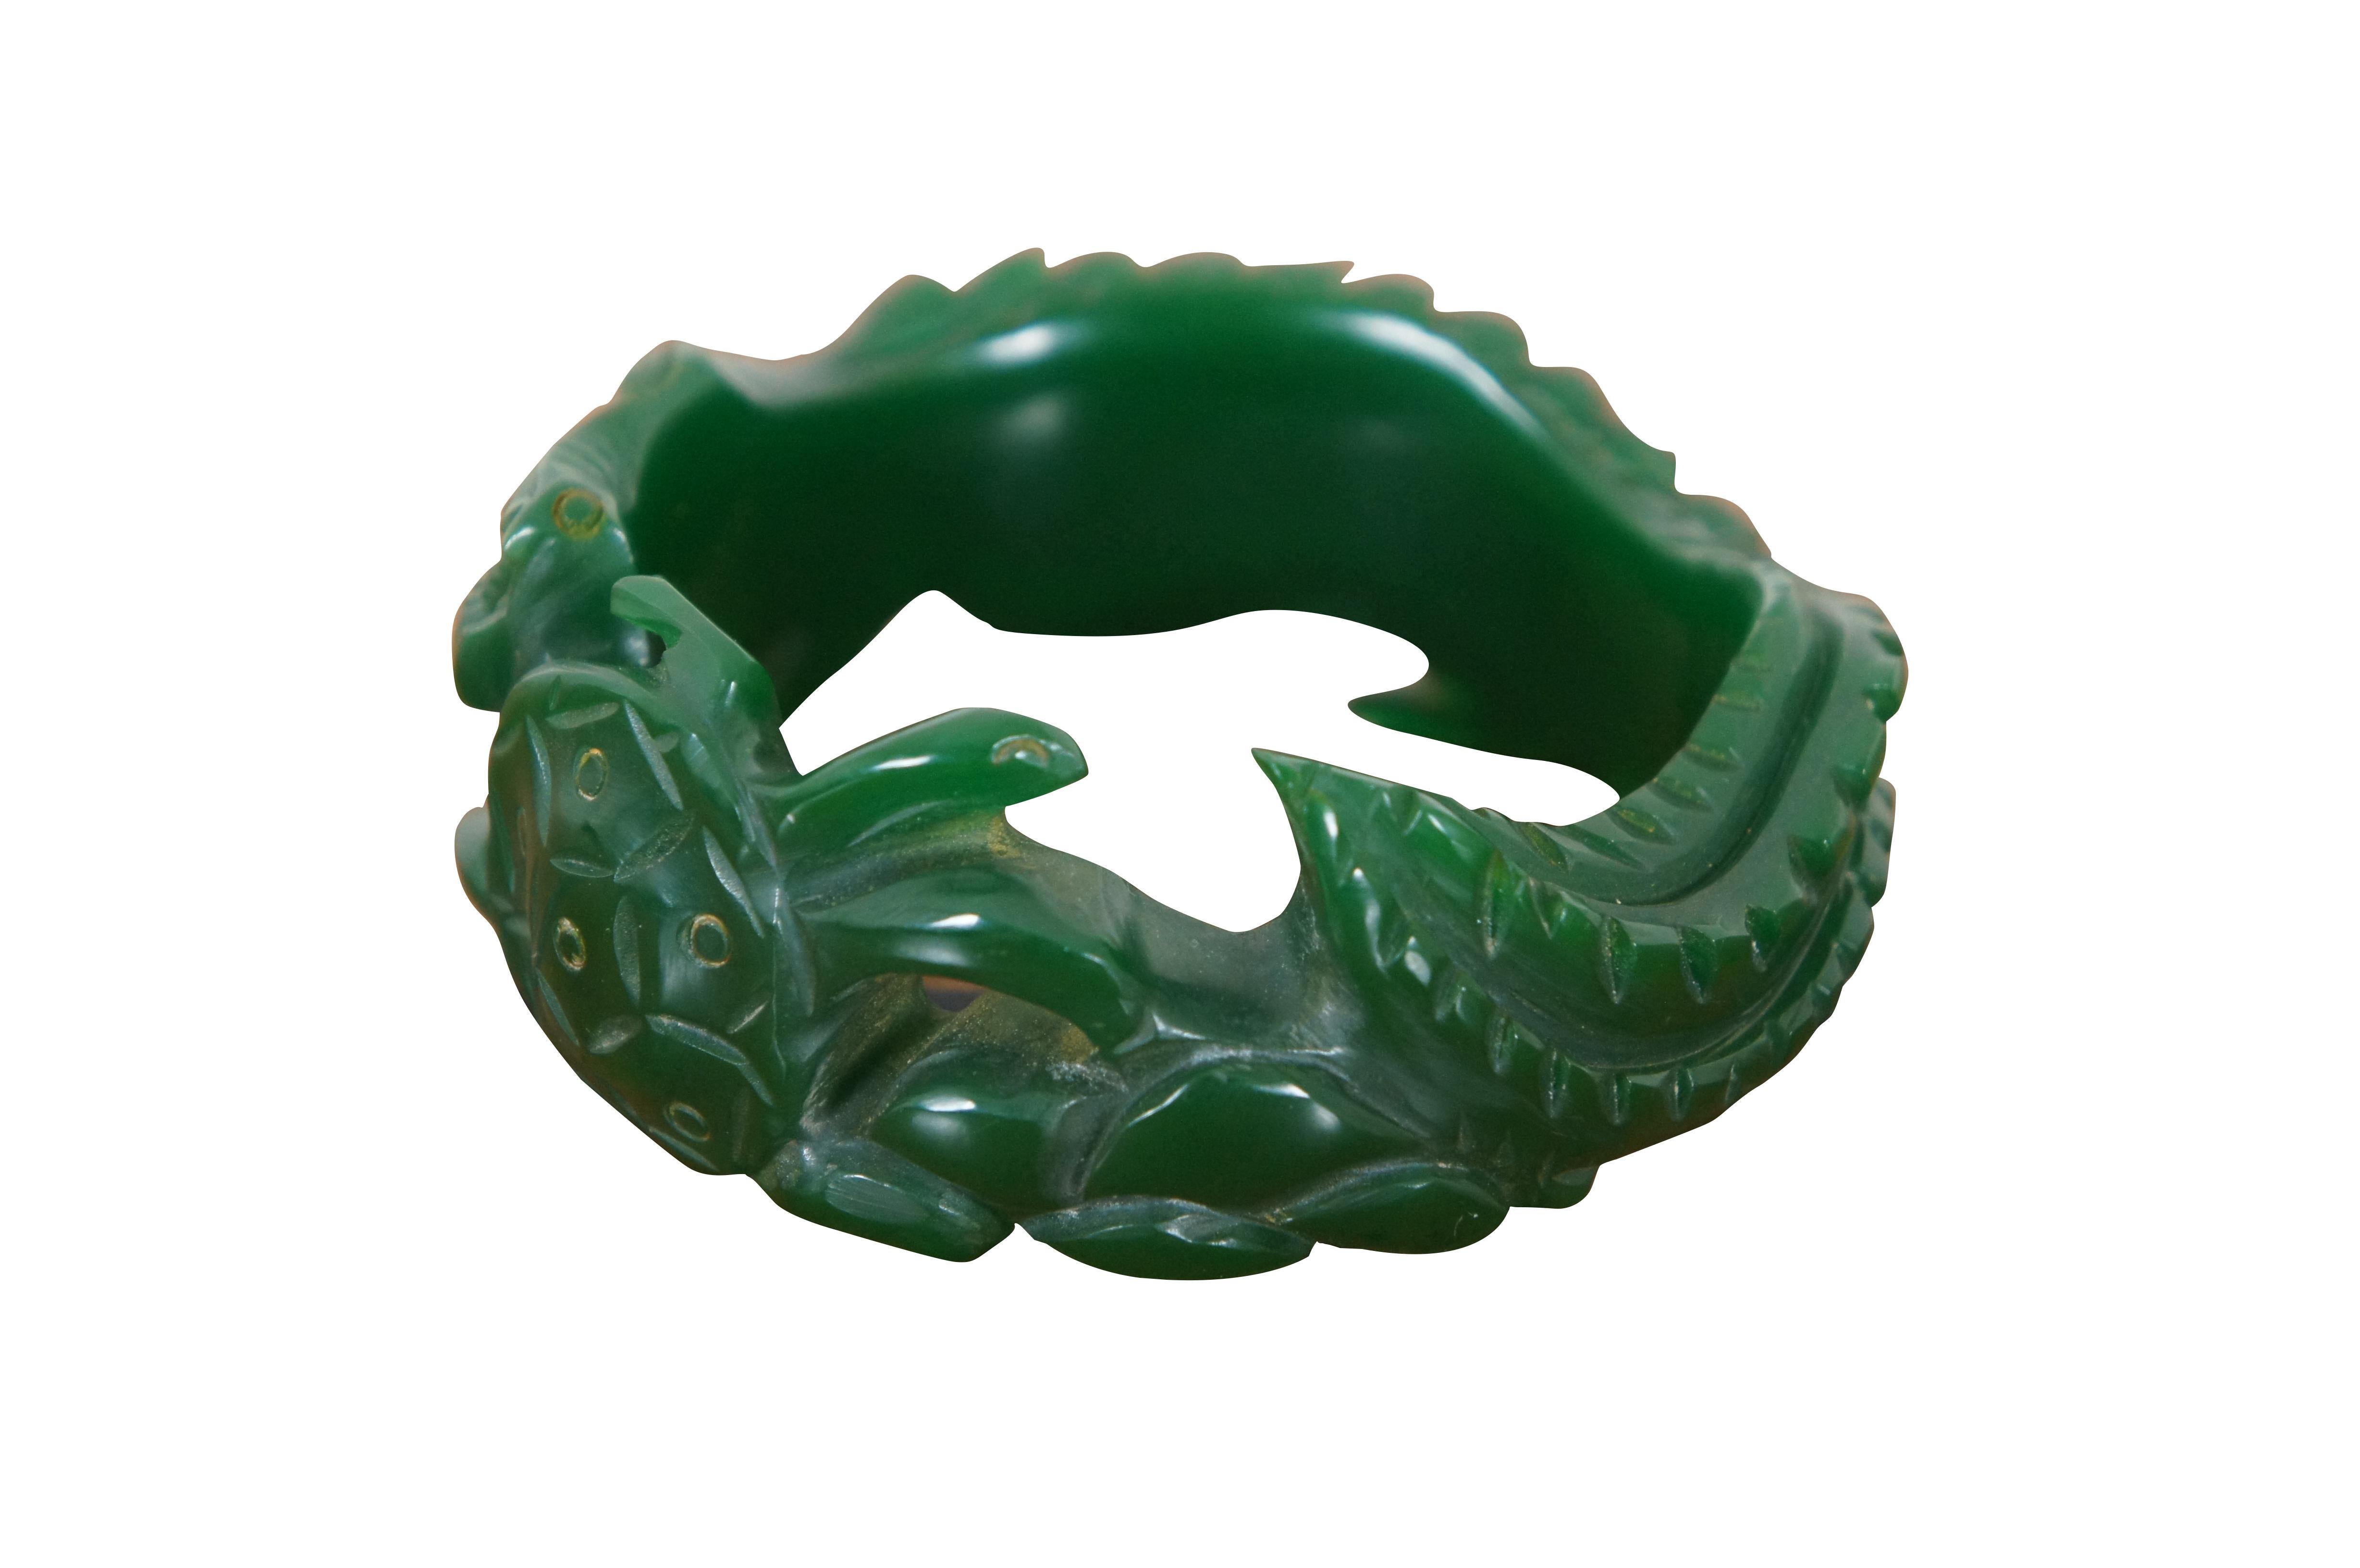 Early to mid 20th century green Bakelite bangle bracelet, beautifully carved in the weaving shape of a crocodile / alligator chasing a sea turtle. Swab tested by previous owner.

Dimensions:
8” x 0.375” x 1.25” (Width x Depth x Height)